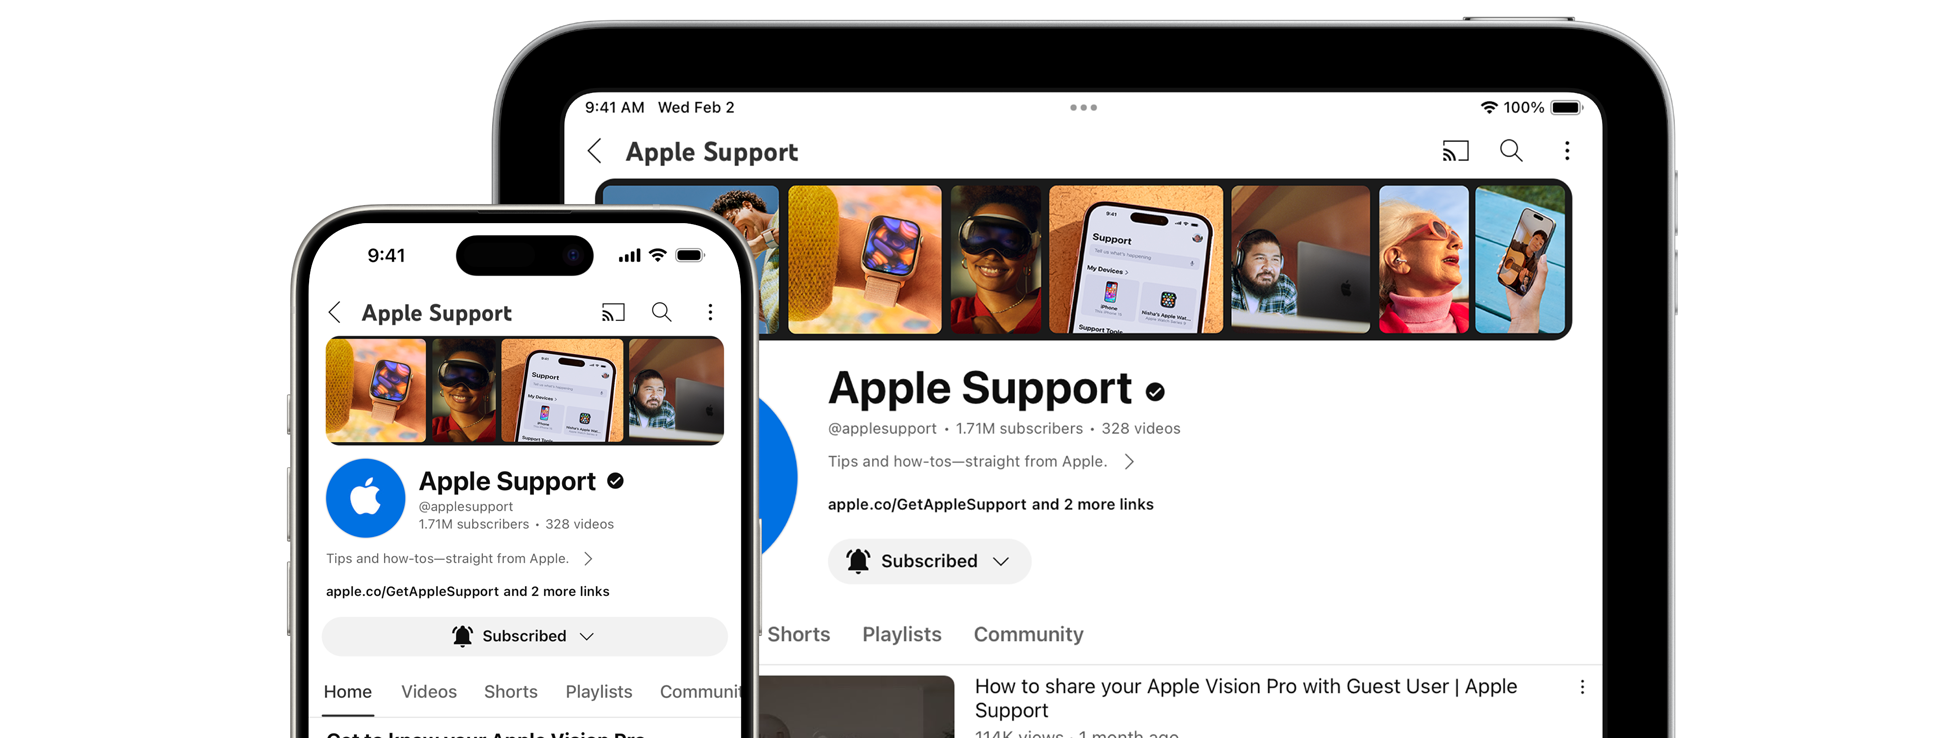 Connect and use your AirPods Max - Apple Support (CA)